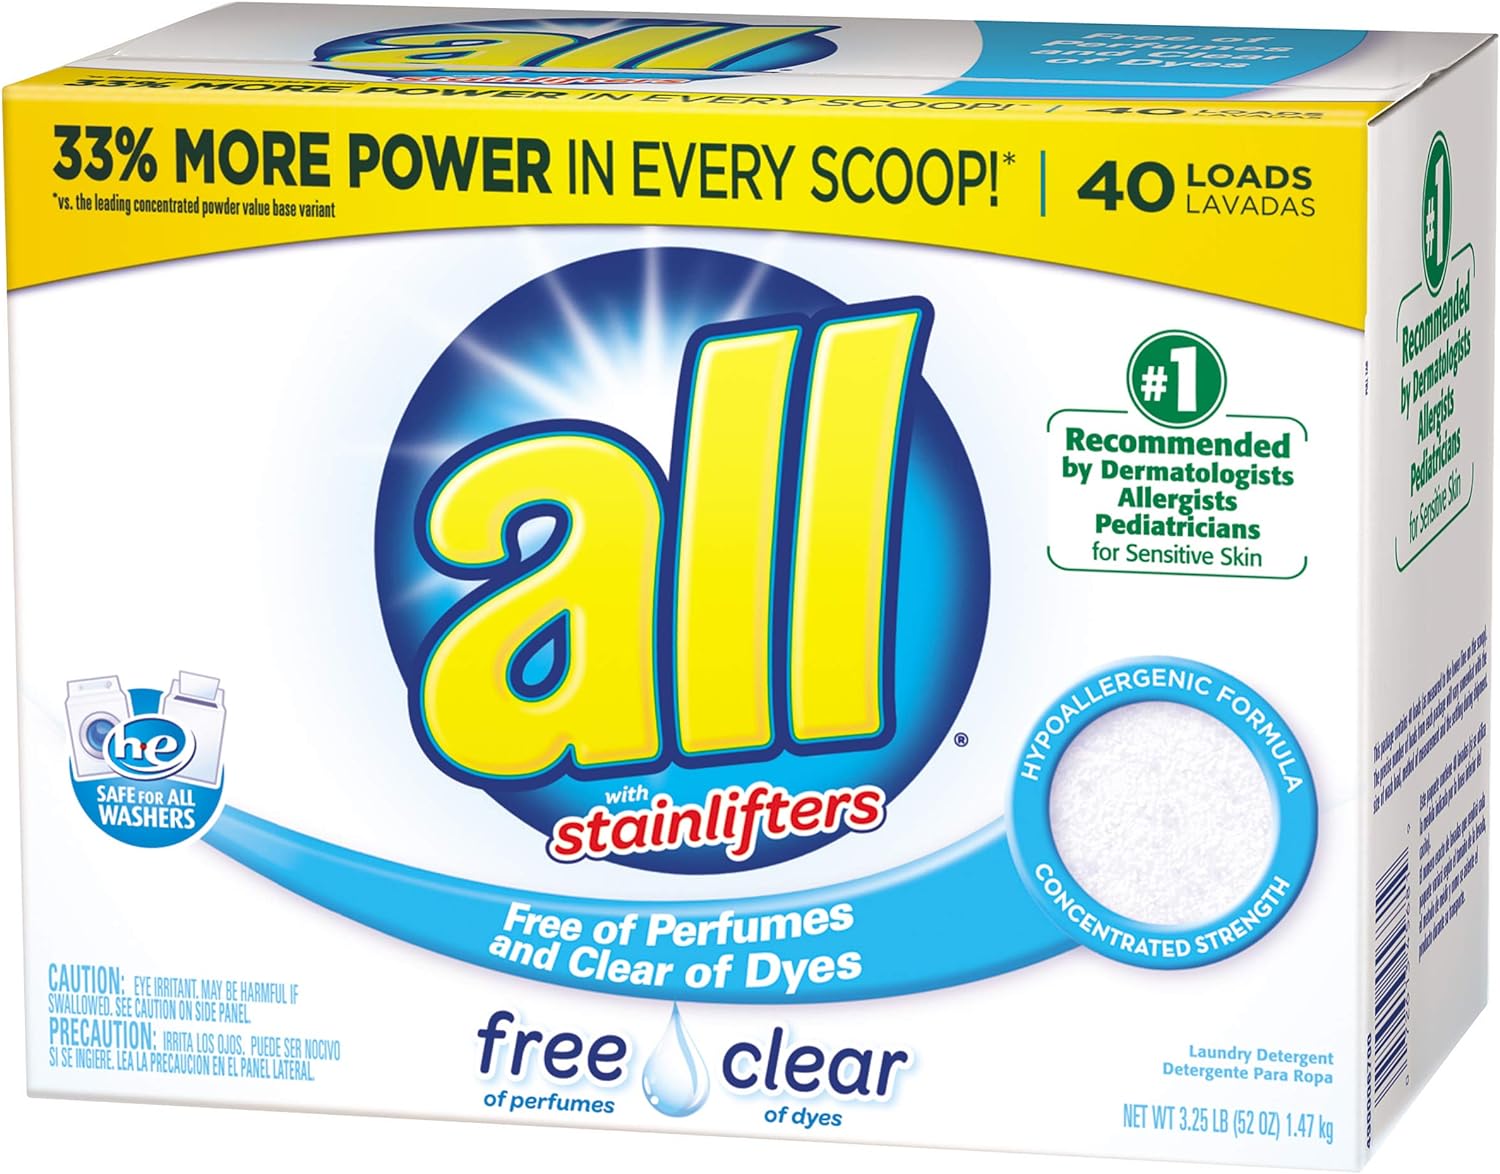 All Powder Laundry Detergent Free Clear for Sensitive Skin 40 Loads - 52oz/6pk